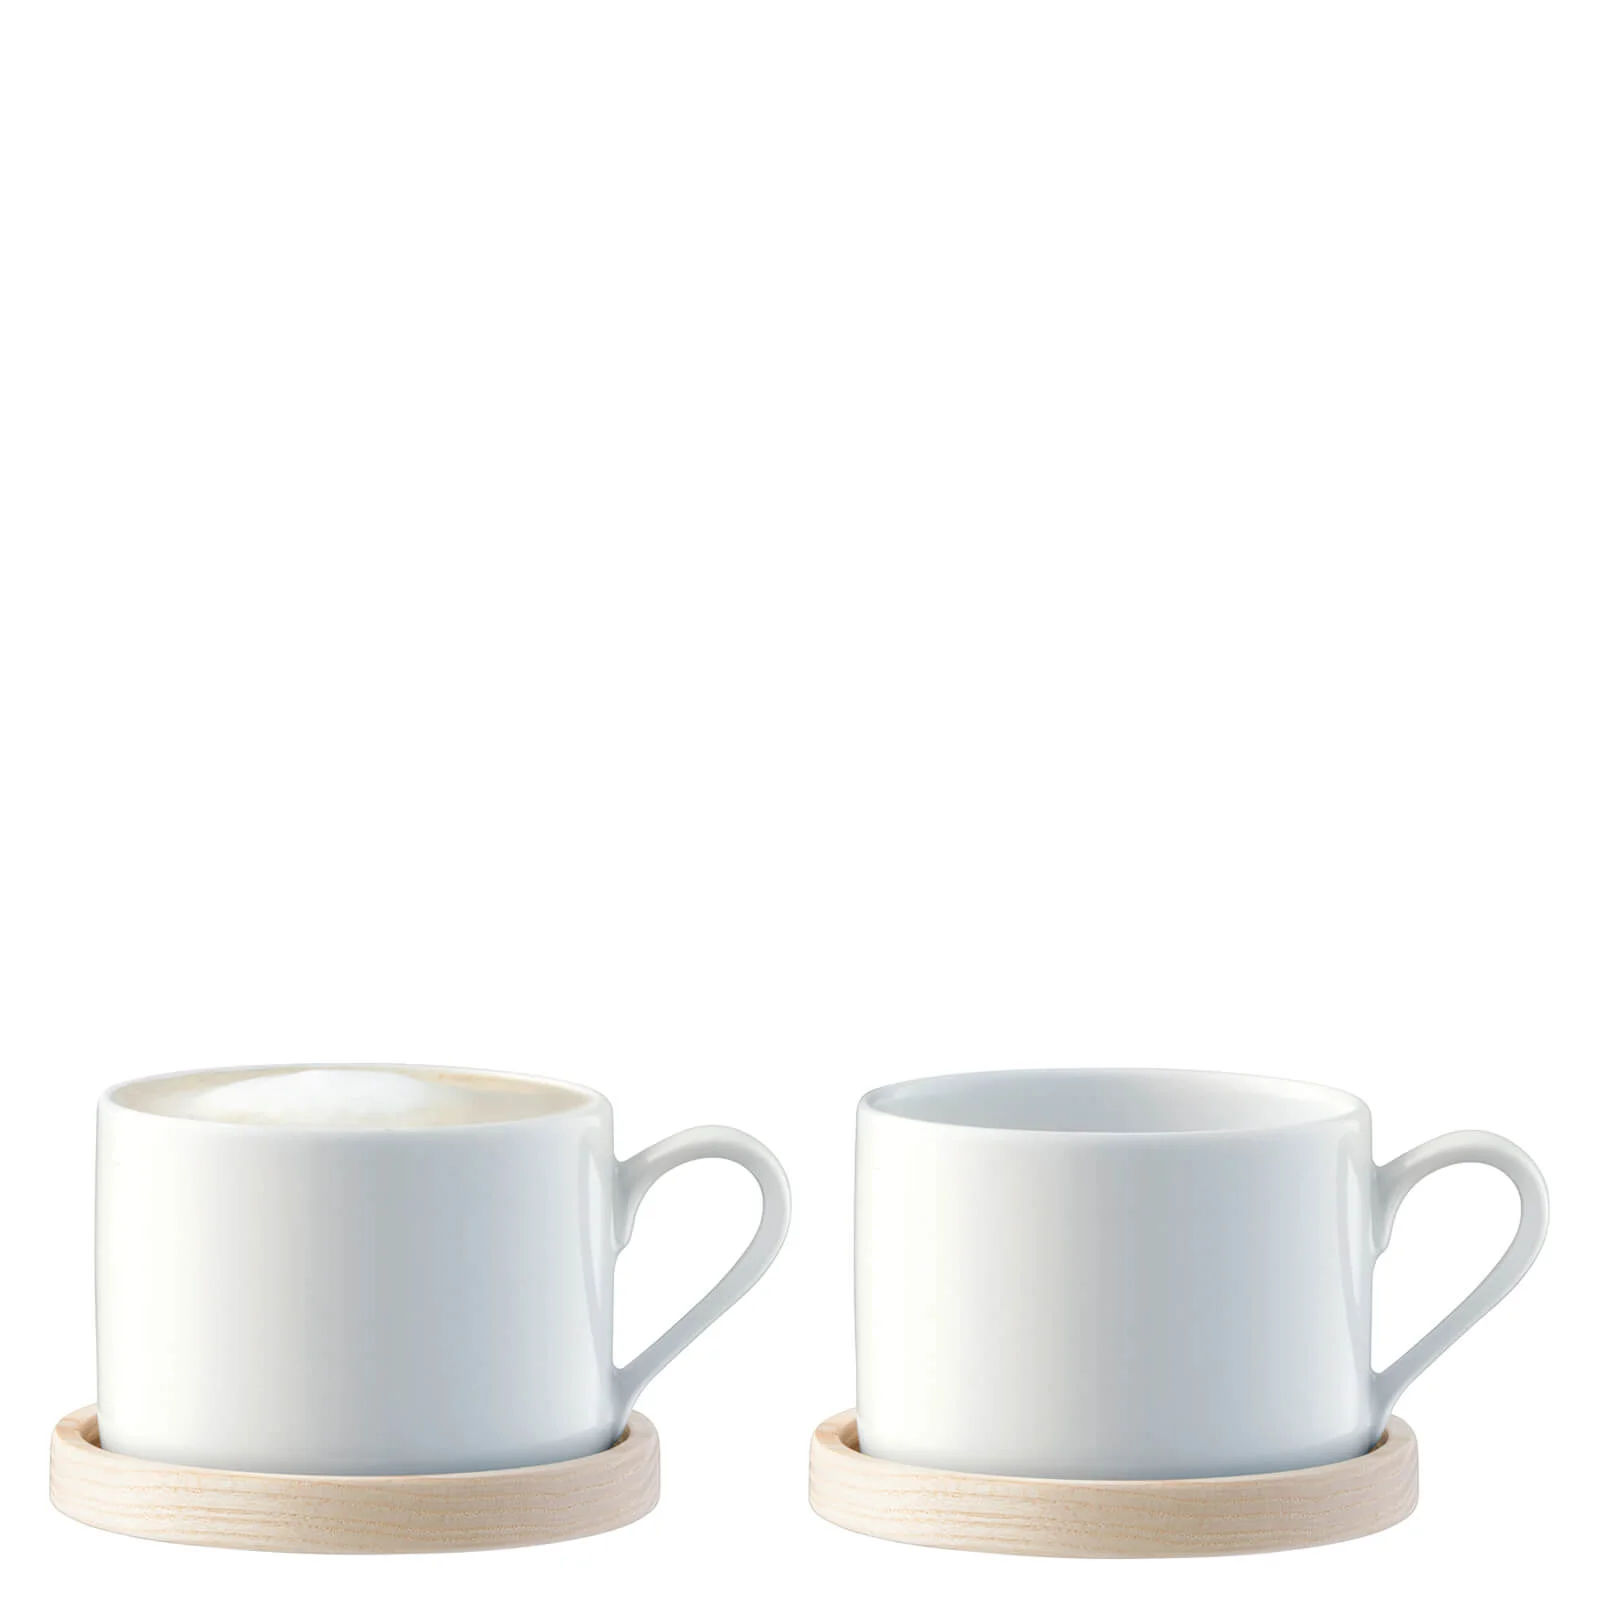 LSA Circle Tea & Coffee Cups with Ash Saucers - 0.25L - Set of 2 Image 1